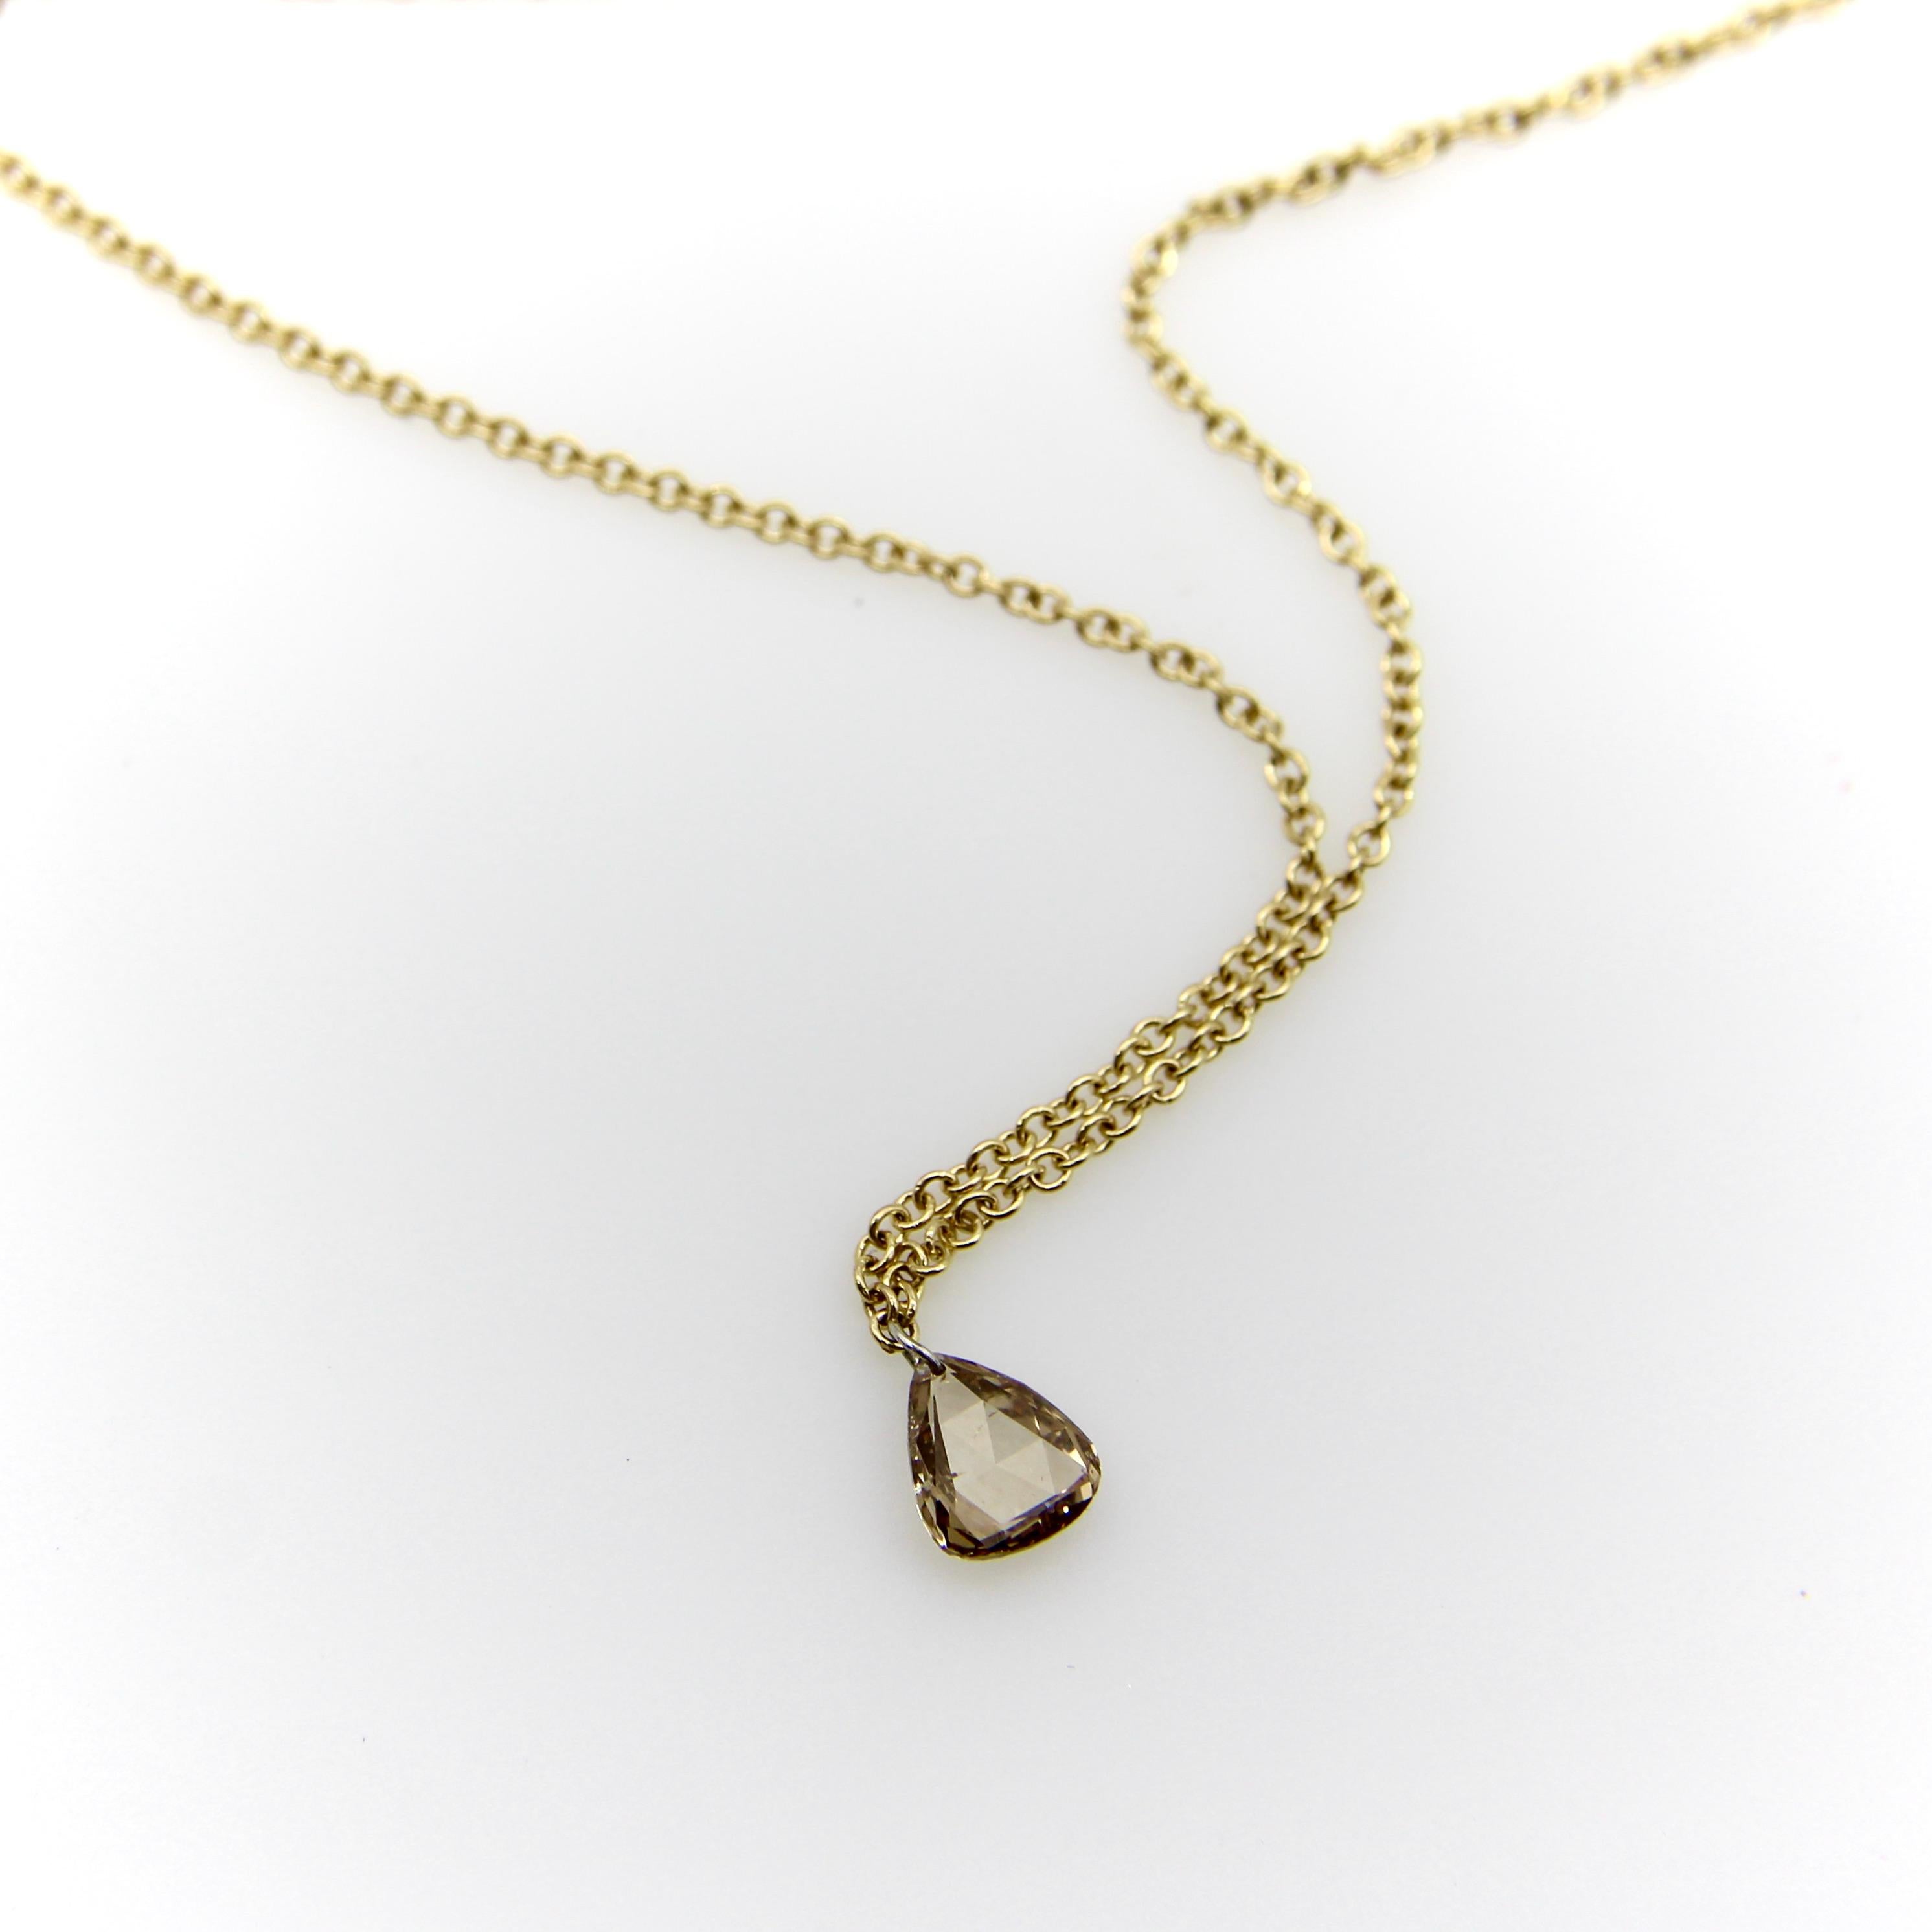 Part of our Signature Collection, we made this 14k gold and cognac diamond necklace by sending the diamond to have a tiny hole drilled in its corner so that it could dangle without a mount. To drill a diamond is a labor intensive process that